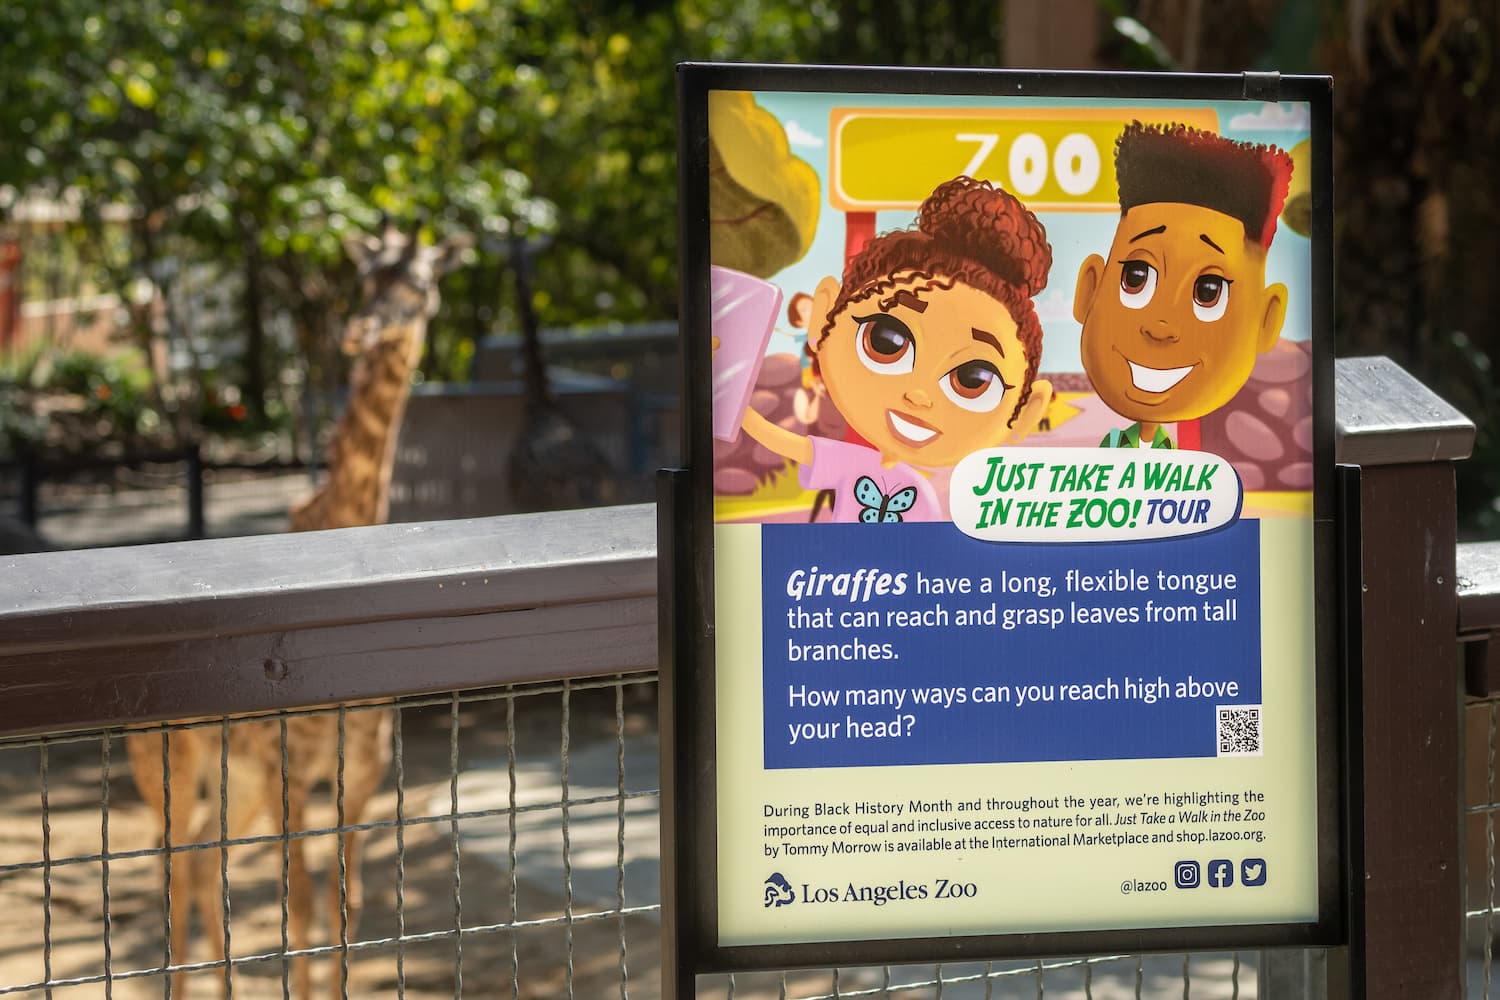 A sign inspired by the children's book "Just Take a Walk in the Zoo" is displayed in front of the Masai giraffe habitat. The sign features an illustration from the book featuring two African American children exploring a zoo. The copy reads, "Giraffes have a long, flexible tongue that can reach and grasp leaves from tall branches. How many ways can you reach high above your head?"